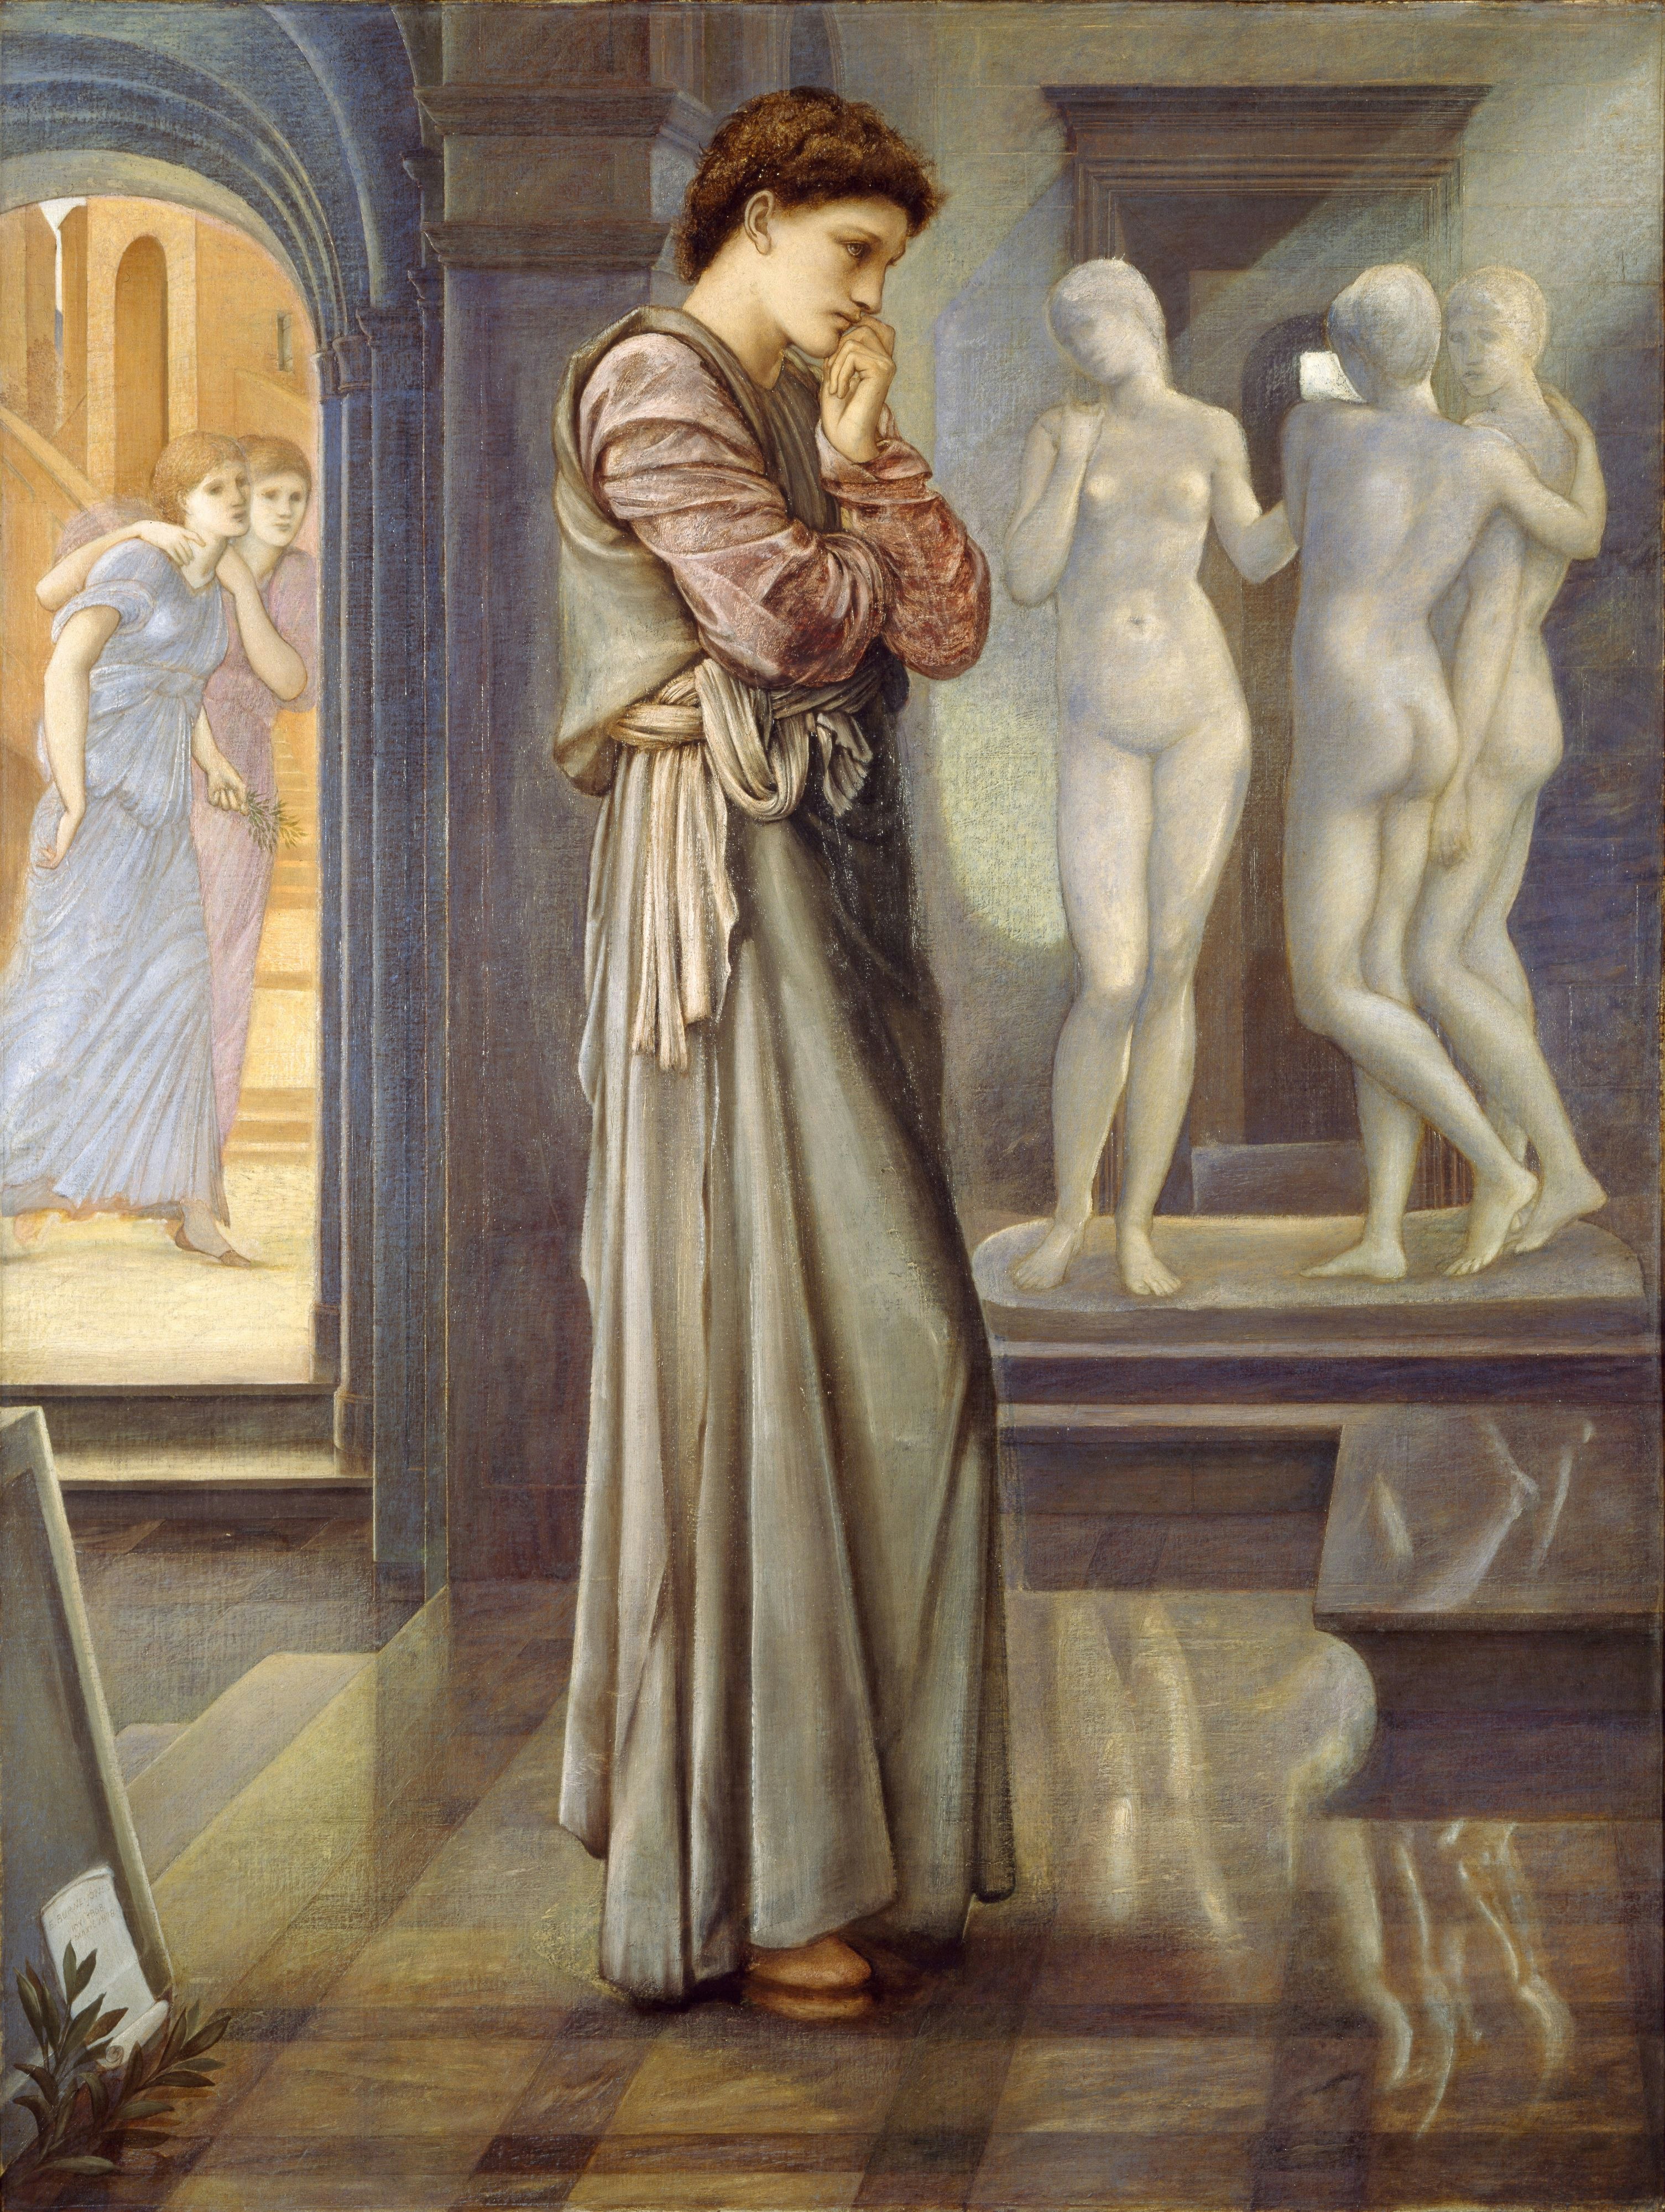 Pygmalion and the Image - The Heart Desires, 1878.
One in a series of four paintings, Artist: Edward Burne-Jones